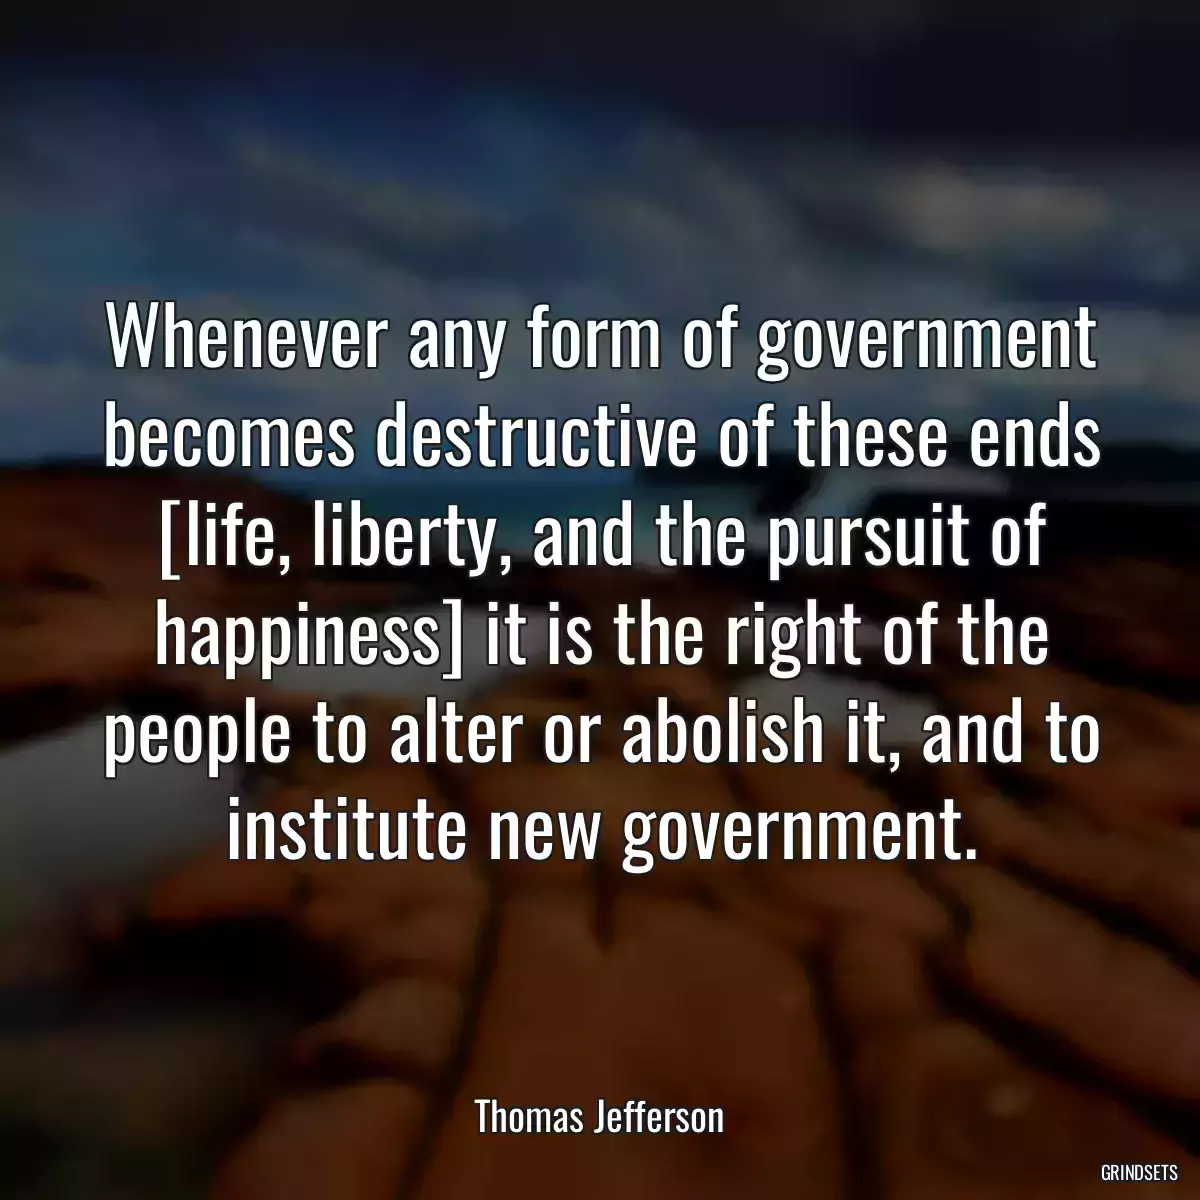 Whenever any form of government becomes destructive of these ends [life, liberty, and the pursuit of happiness] it is the right of the people to alter or abolish it, and to institute new government.